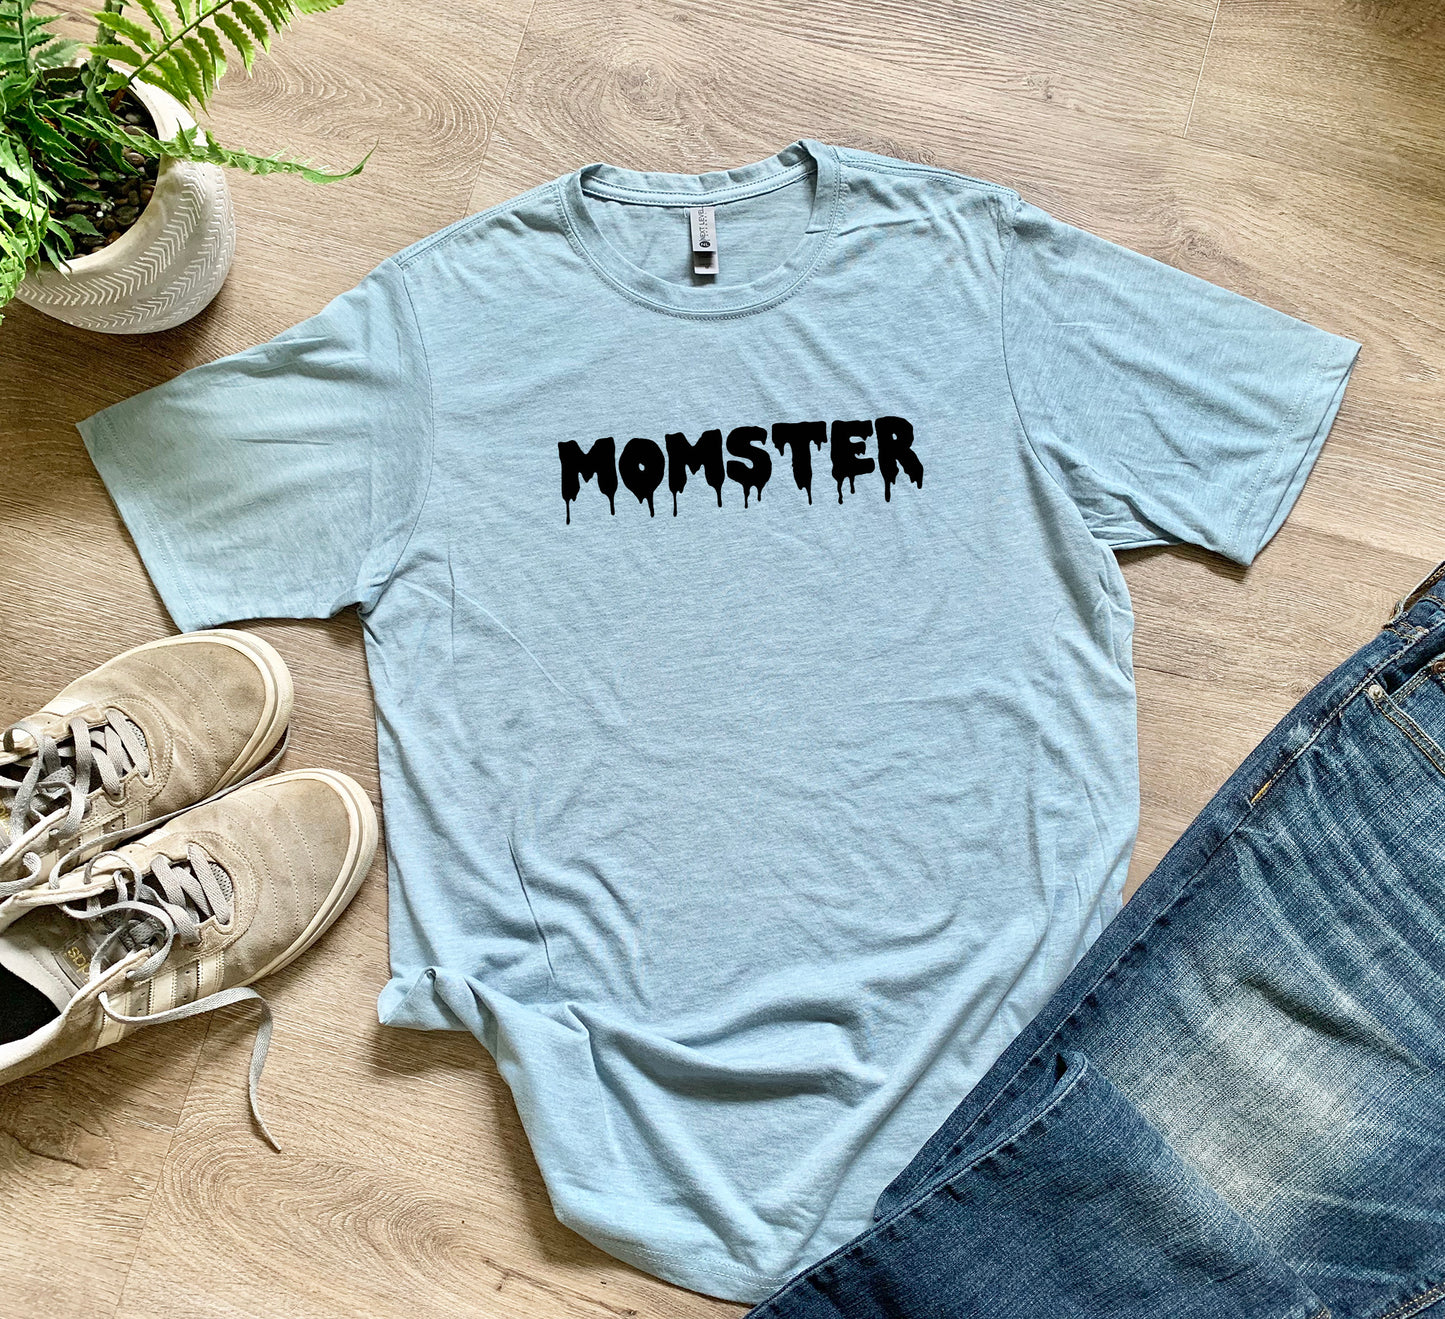 a t - shirt with the word monster on it next to a pair of jeans